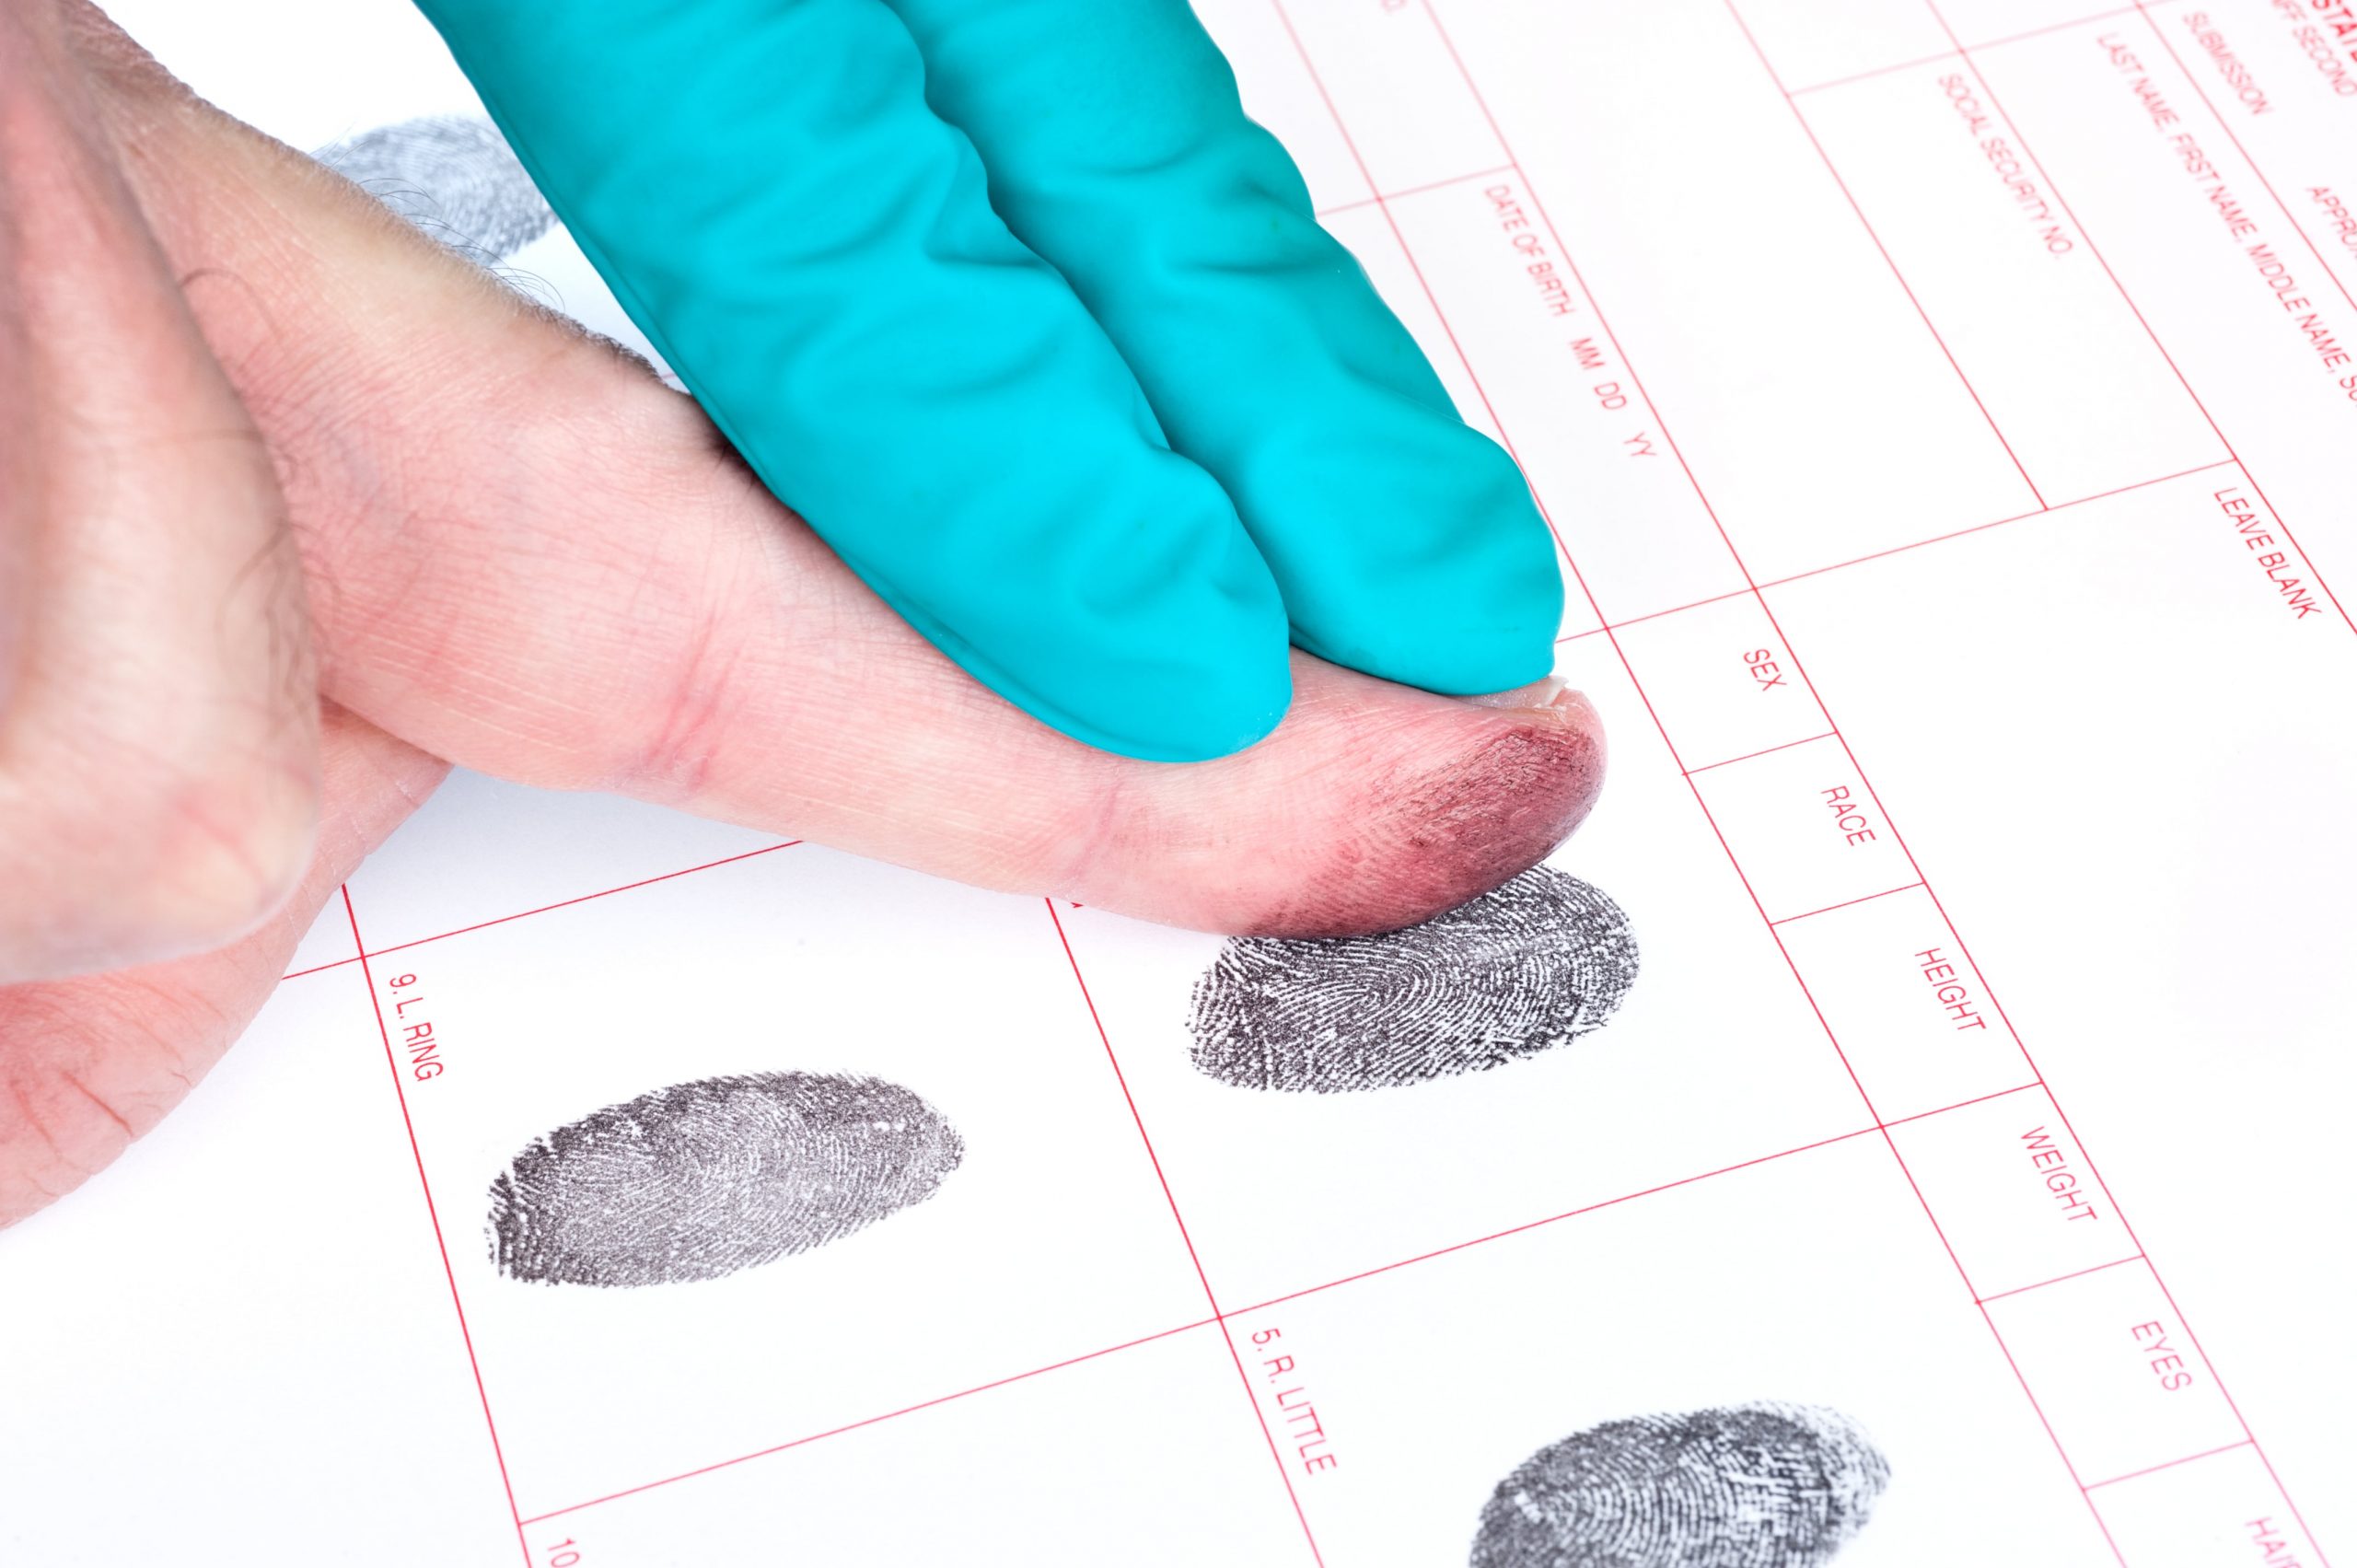 Global biometrics market expected to grow to $76 billion by 2027